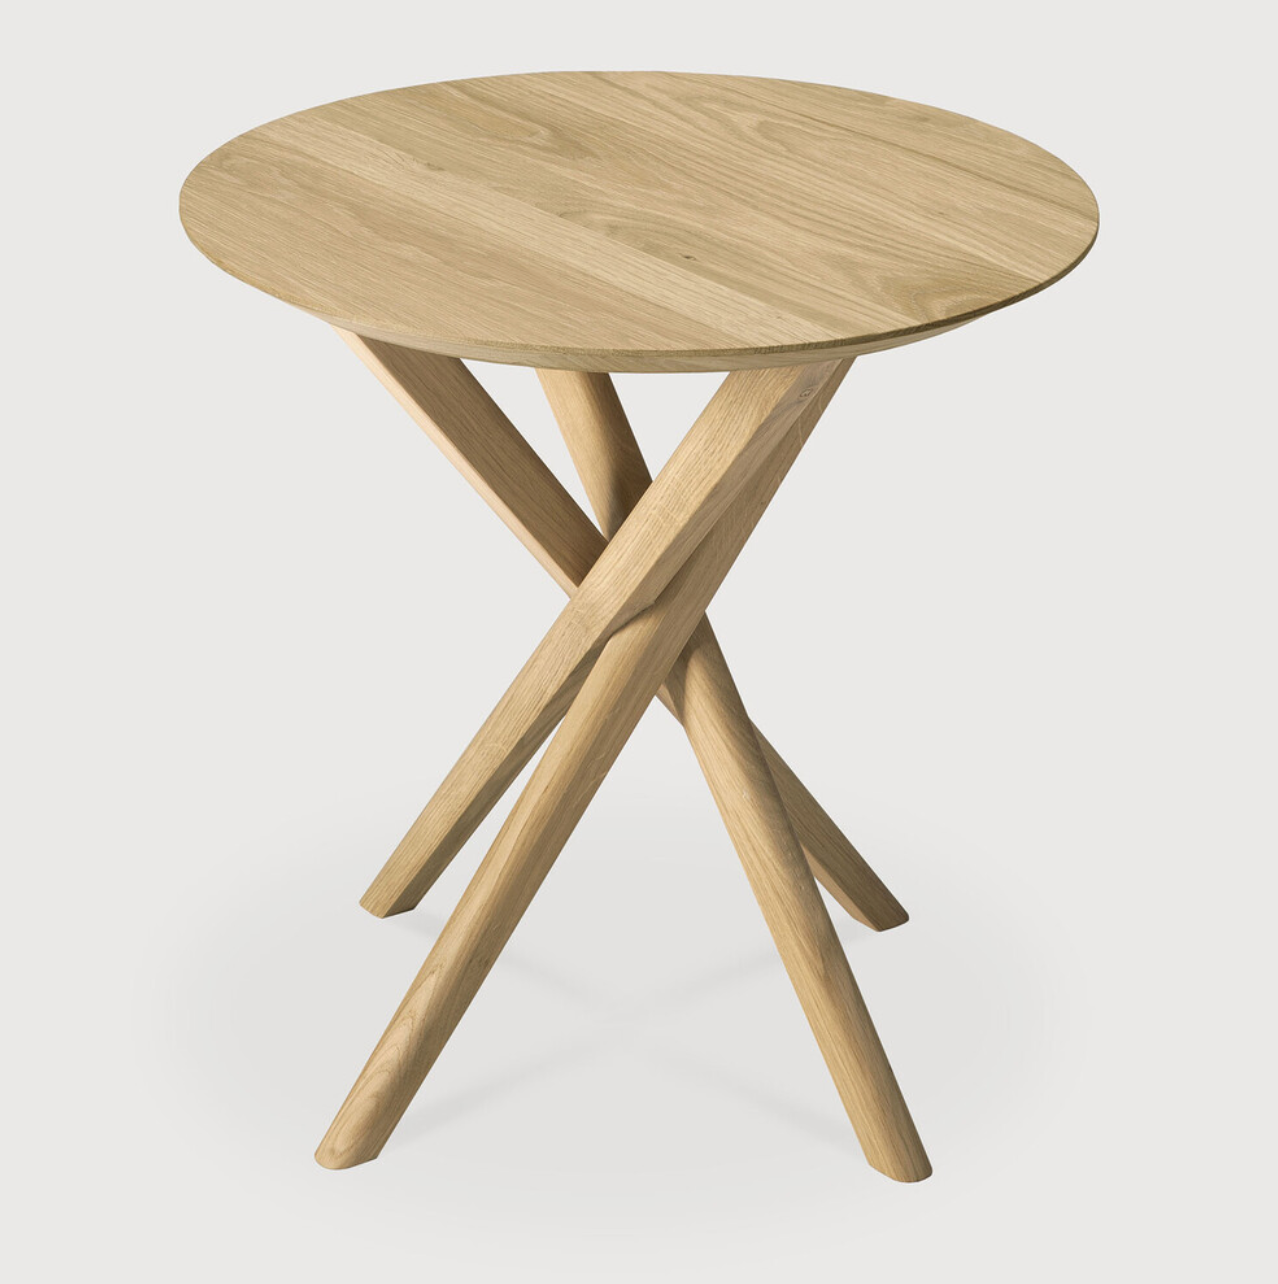 Designed by Alain van Havre, this Oak Mikado Side Table brings a unique sense of balance and symmetry to any space. Place on the side of your favorite sofa or accent chair to complete the look!   Dimensions: 20"w x 20"d x 20"h   Material: Oak  Finish: Oiled